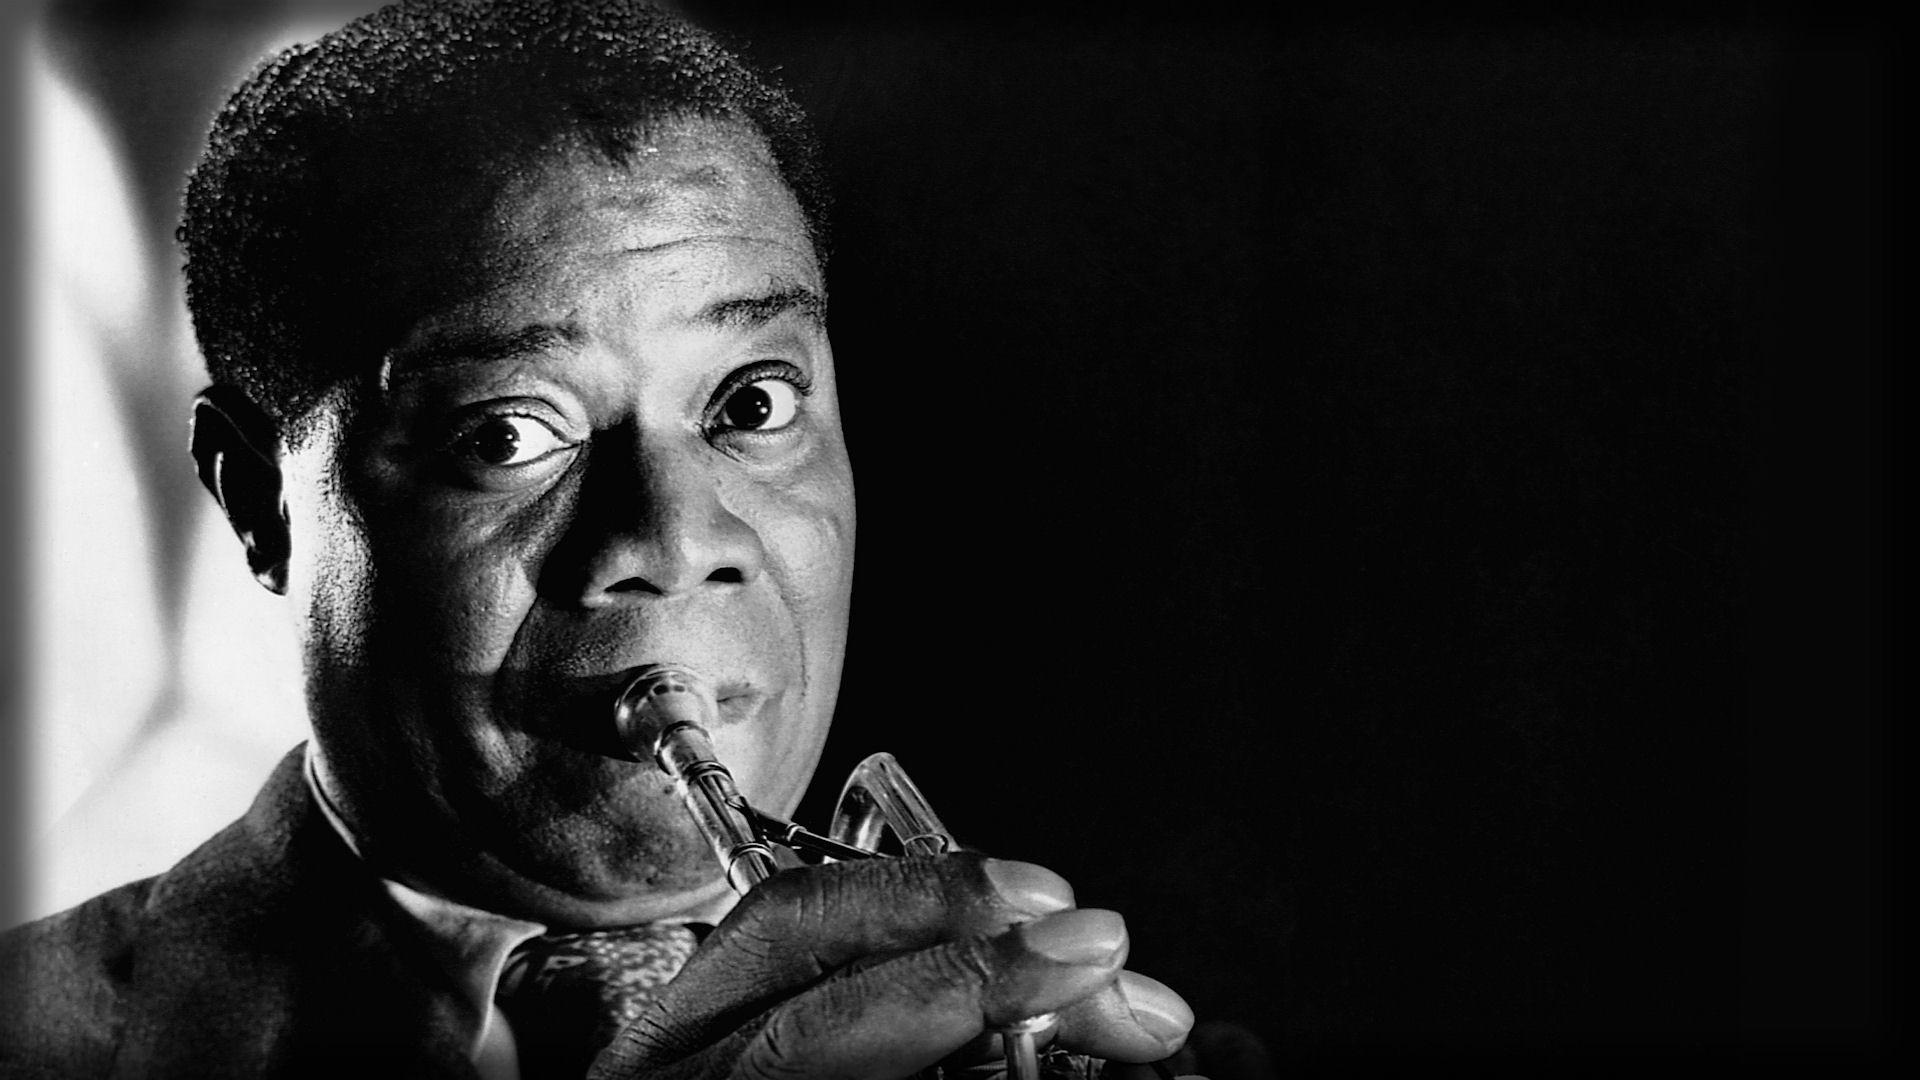 Download Wallpaper 1920x1080 louis armstrong, look, pipe, face